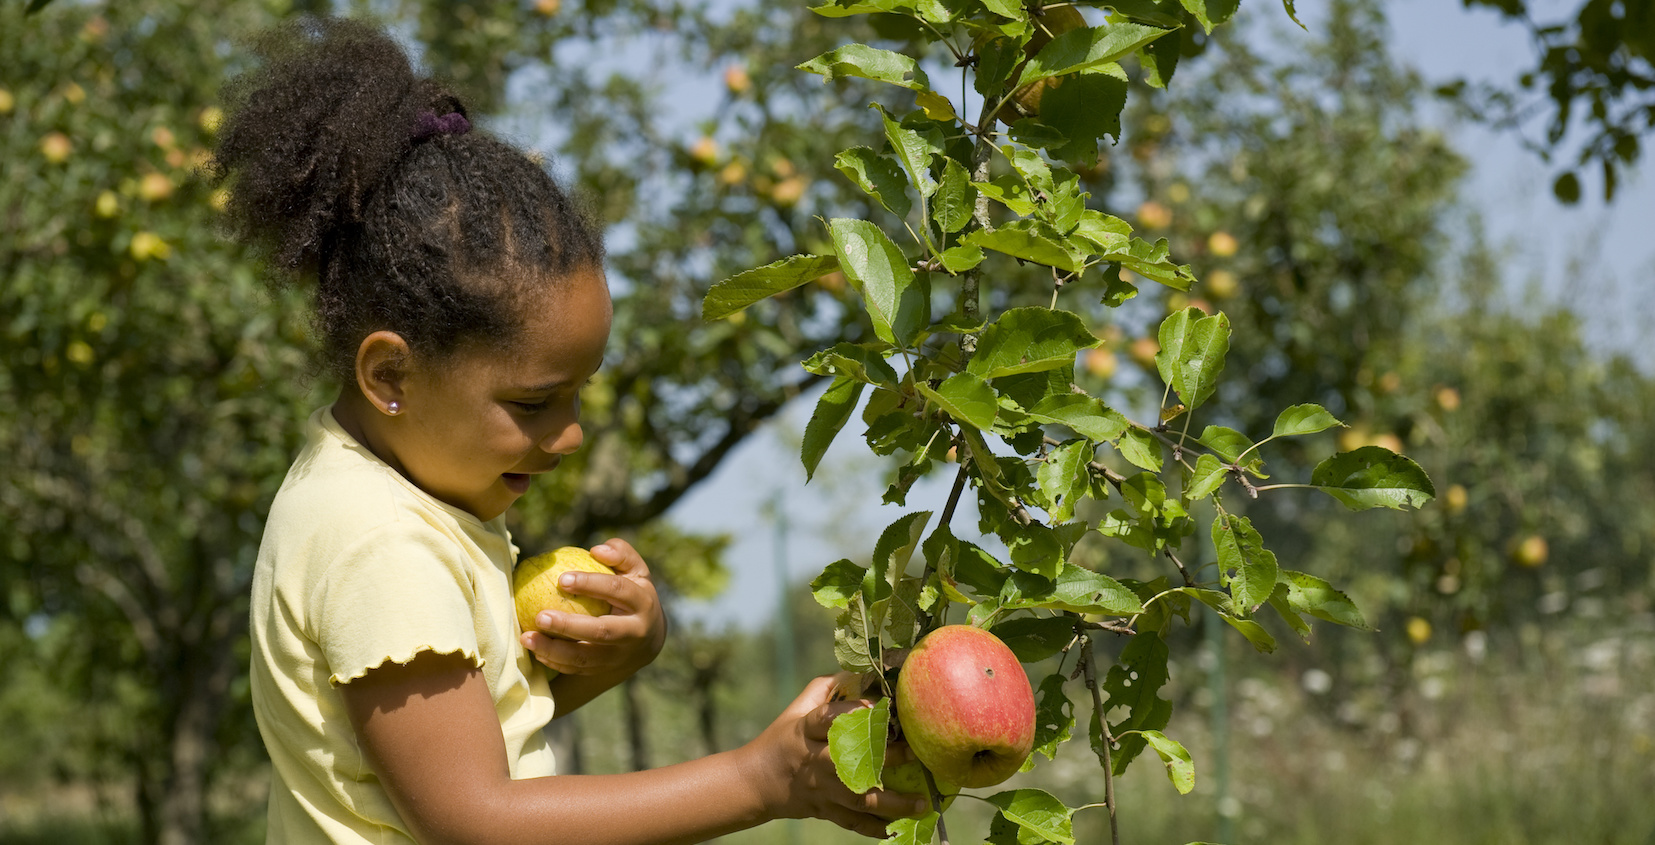 Little girl picking an apple in an orchard